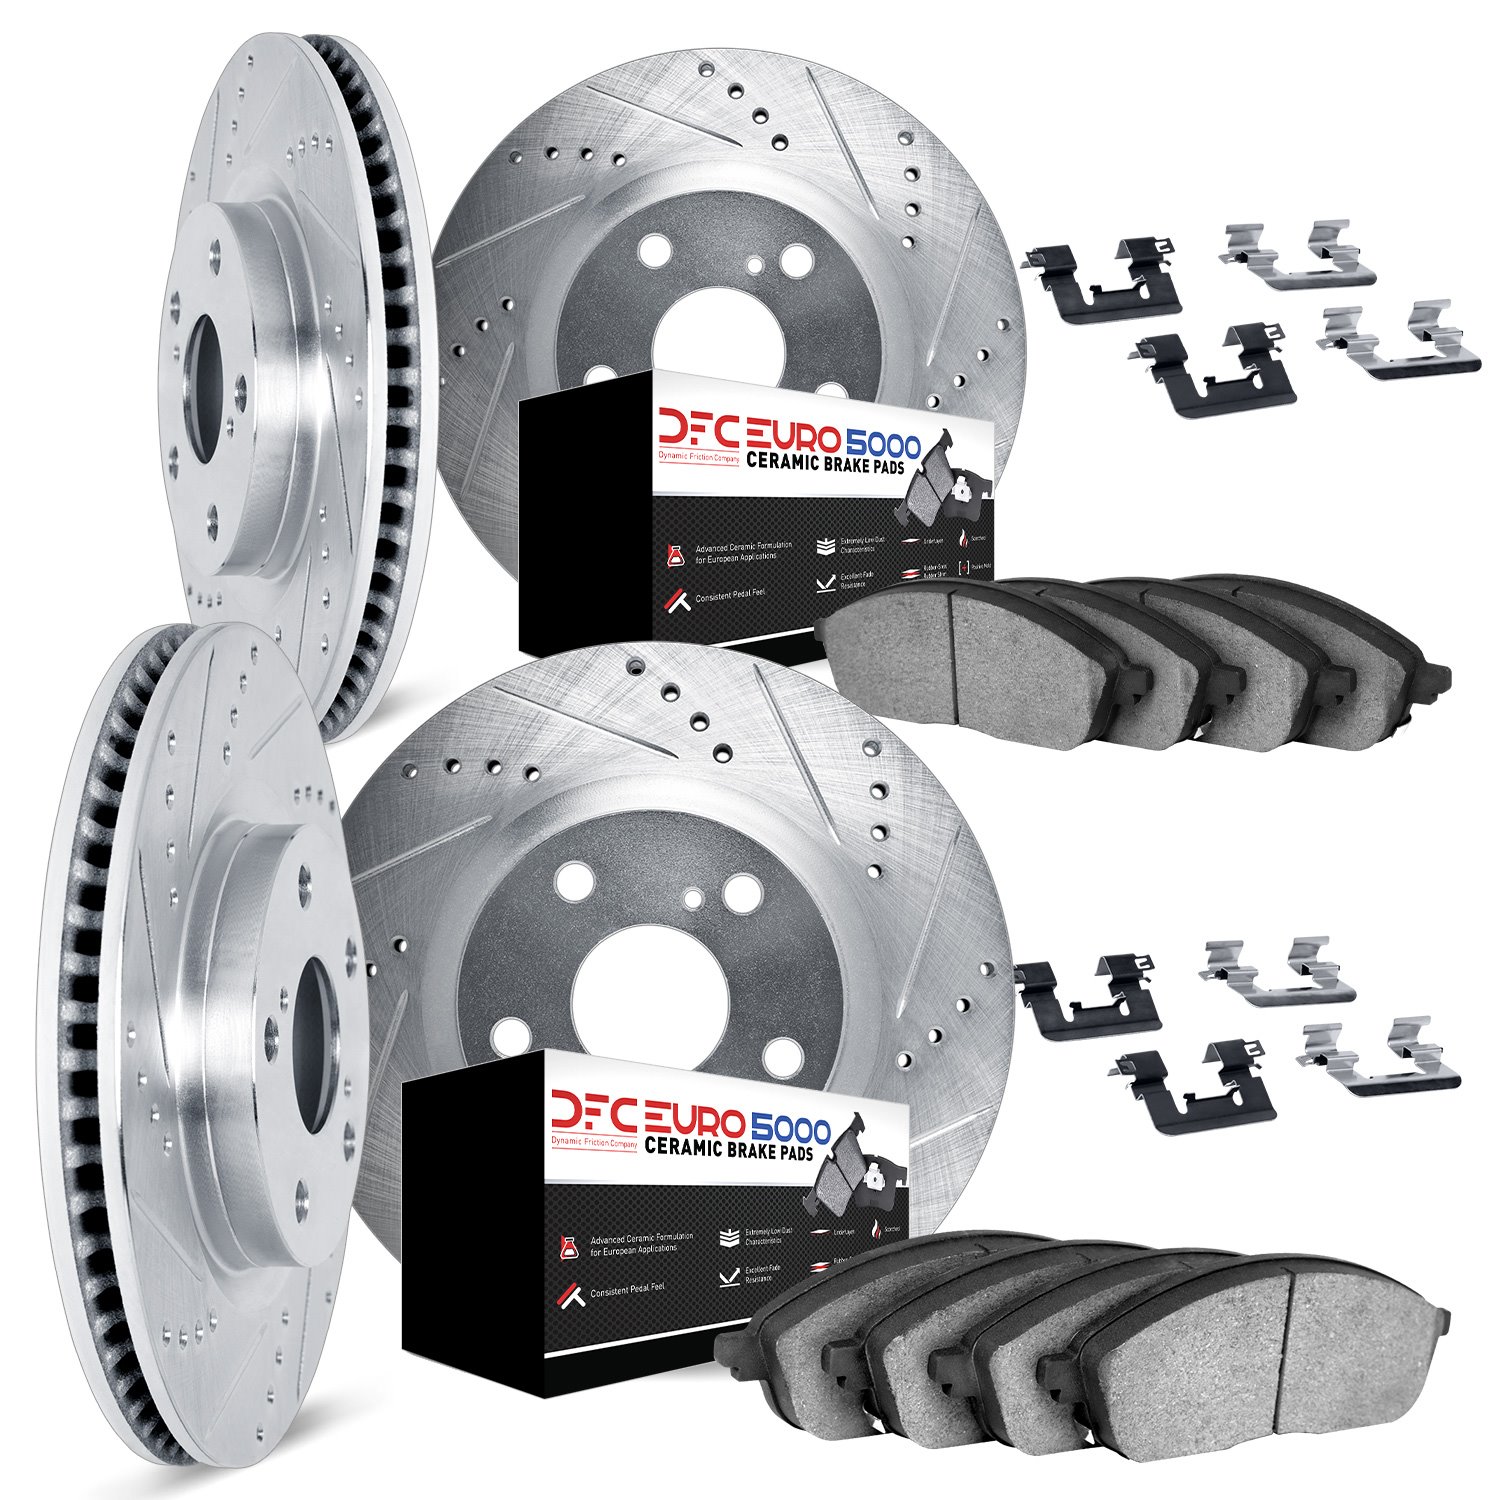 7614-31022 Drilled/Slotted Brake Rotors w/5000 Euro Ceramic Brake Pads Kit & Hardware [Silver], 2004-2010 BMW, Position: Front a